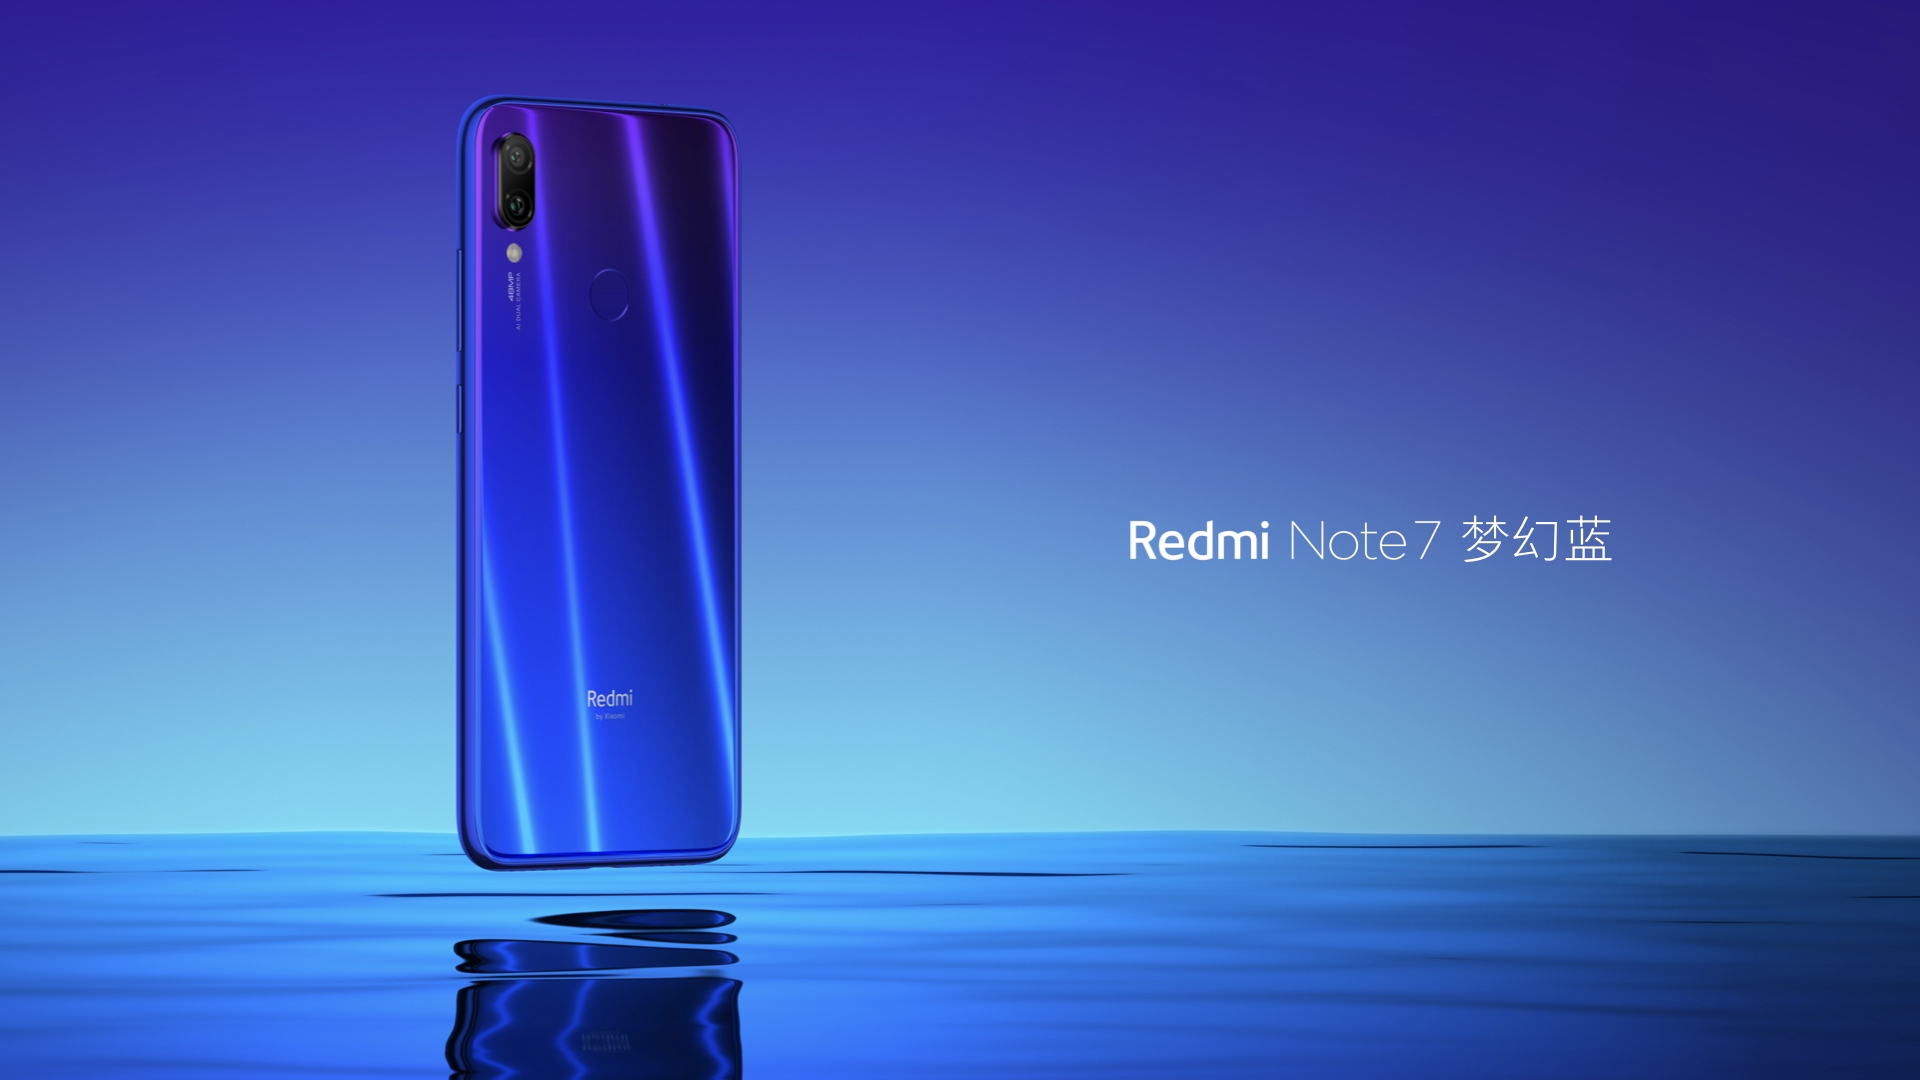  Redmi Note 7 with premium glass body 19 5 9 screen and 